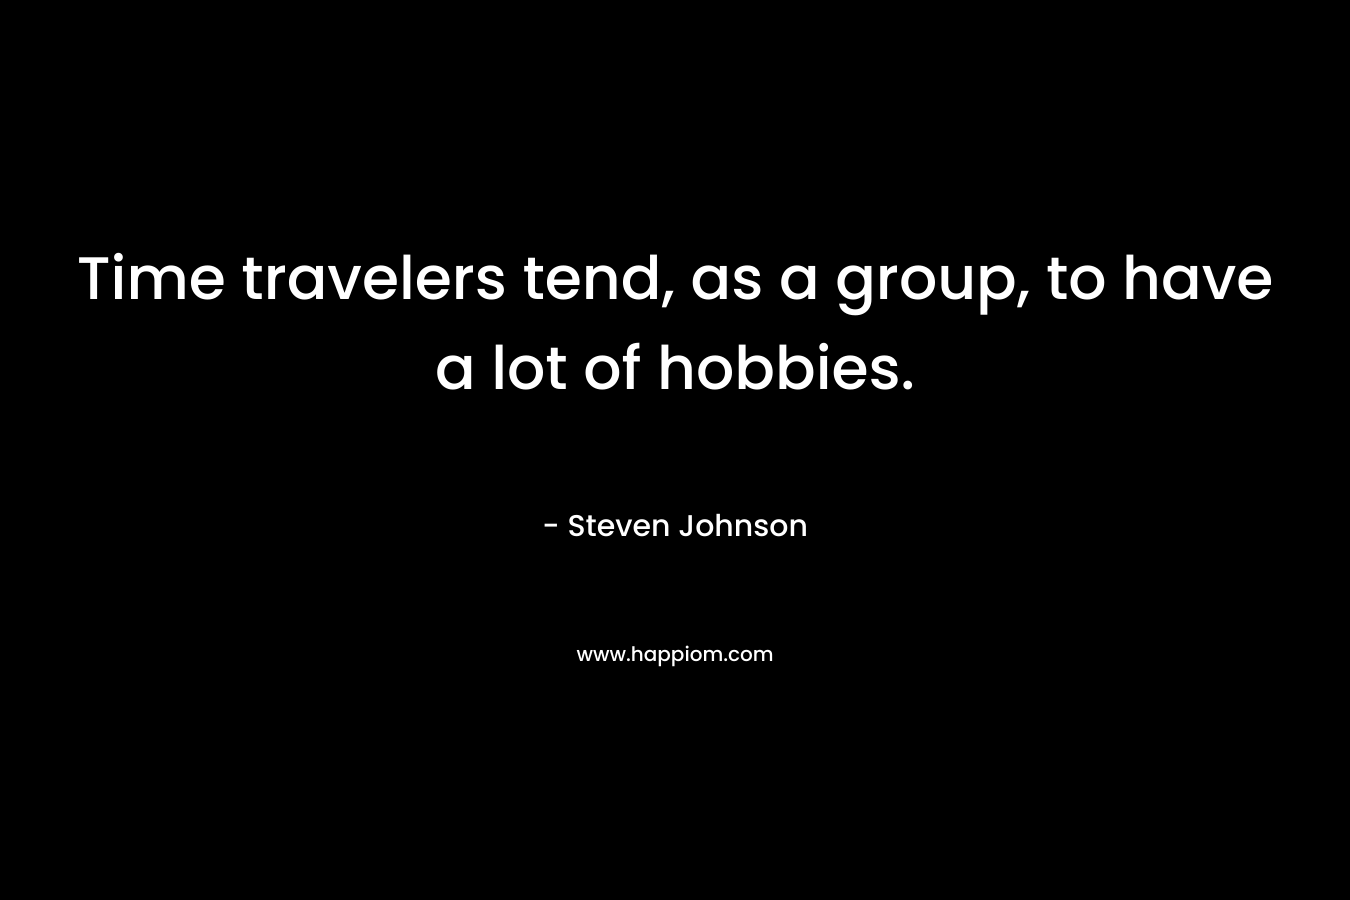 Time travelers tend, as a group, to have a lot of hobbies. – Steven Johnson